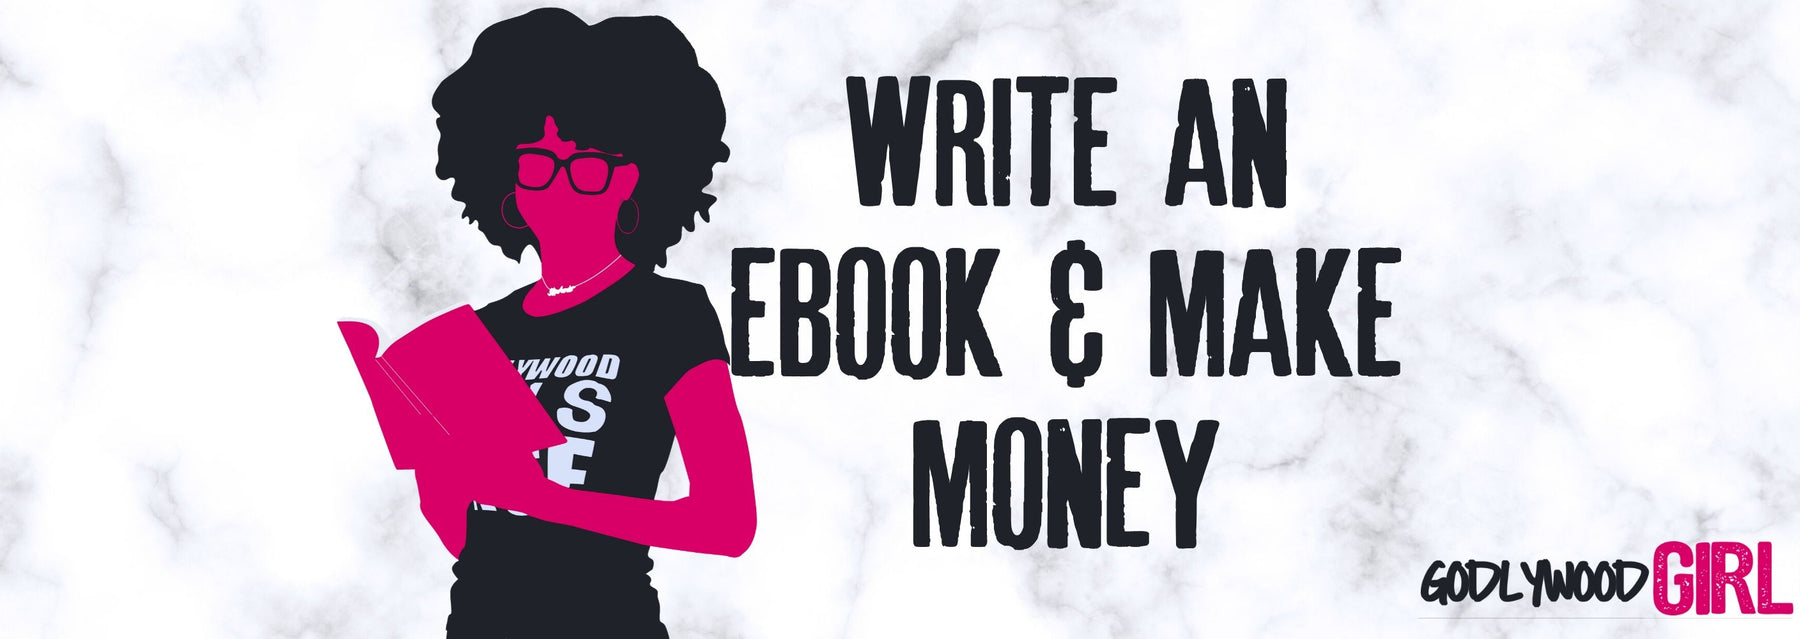 HOW TO WRITE AN EBOOK AND MAKE MONEY (How to Make Passive Income From Ebooks) || HOW TO